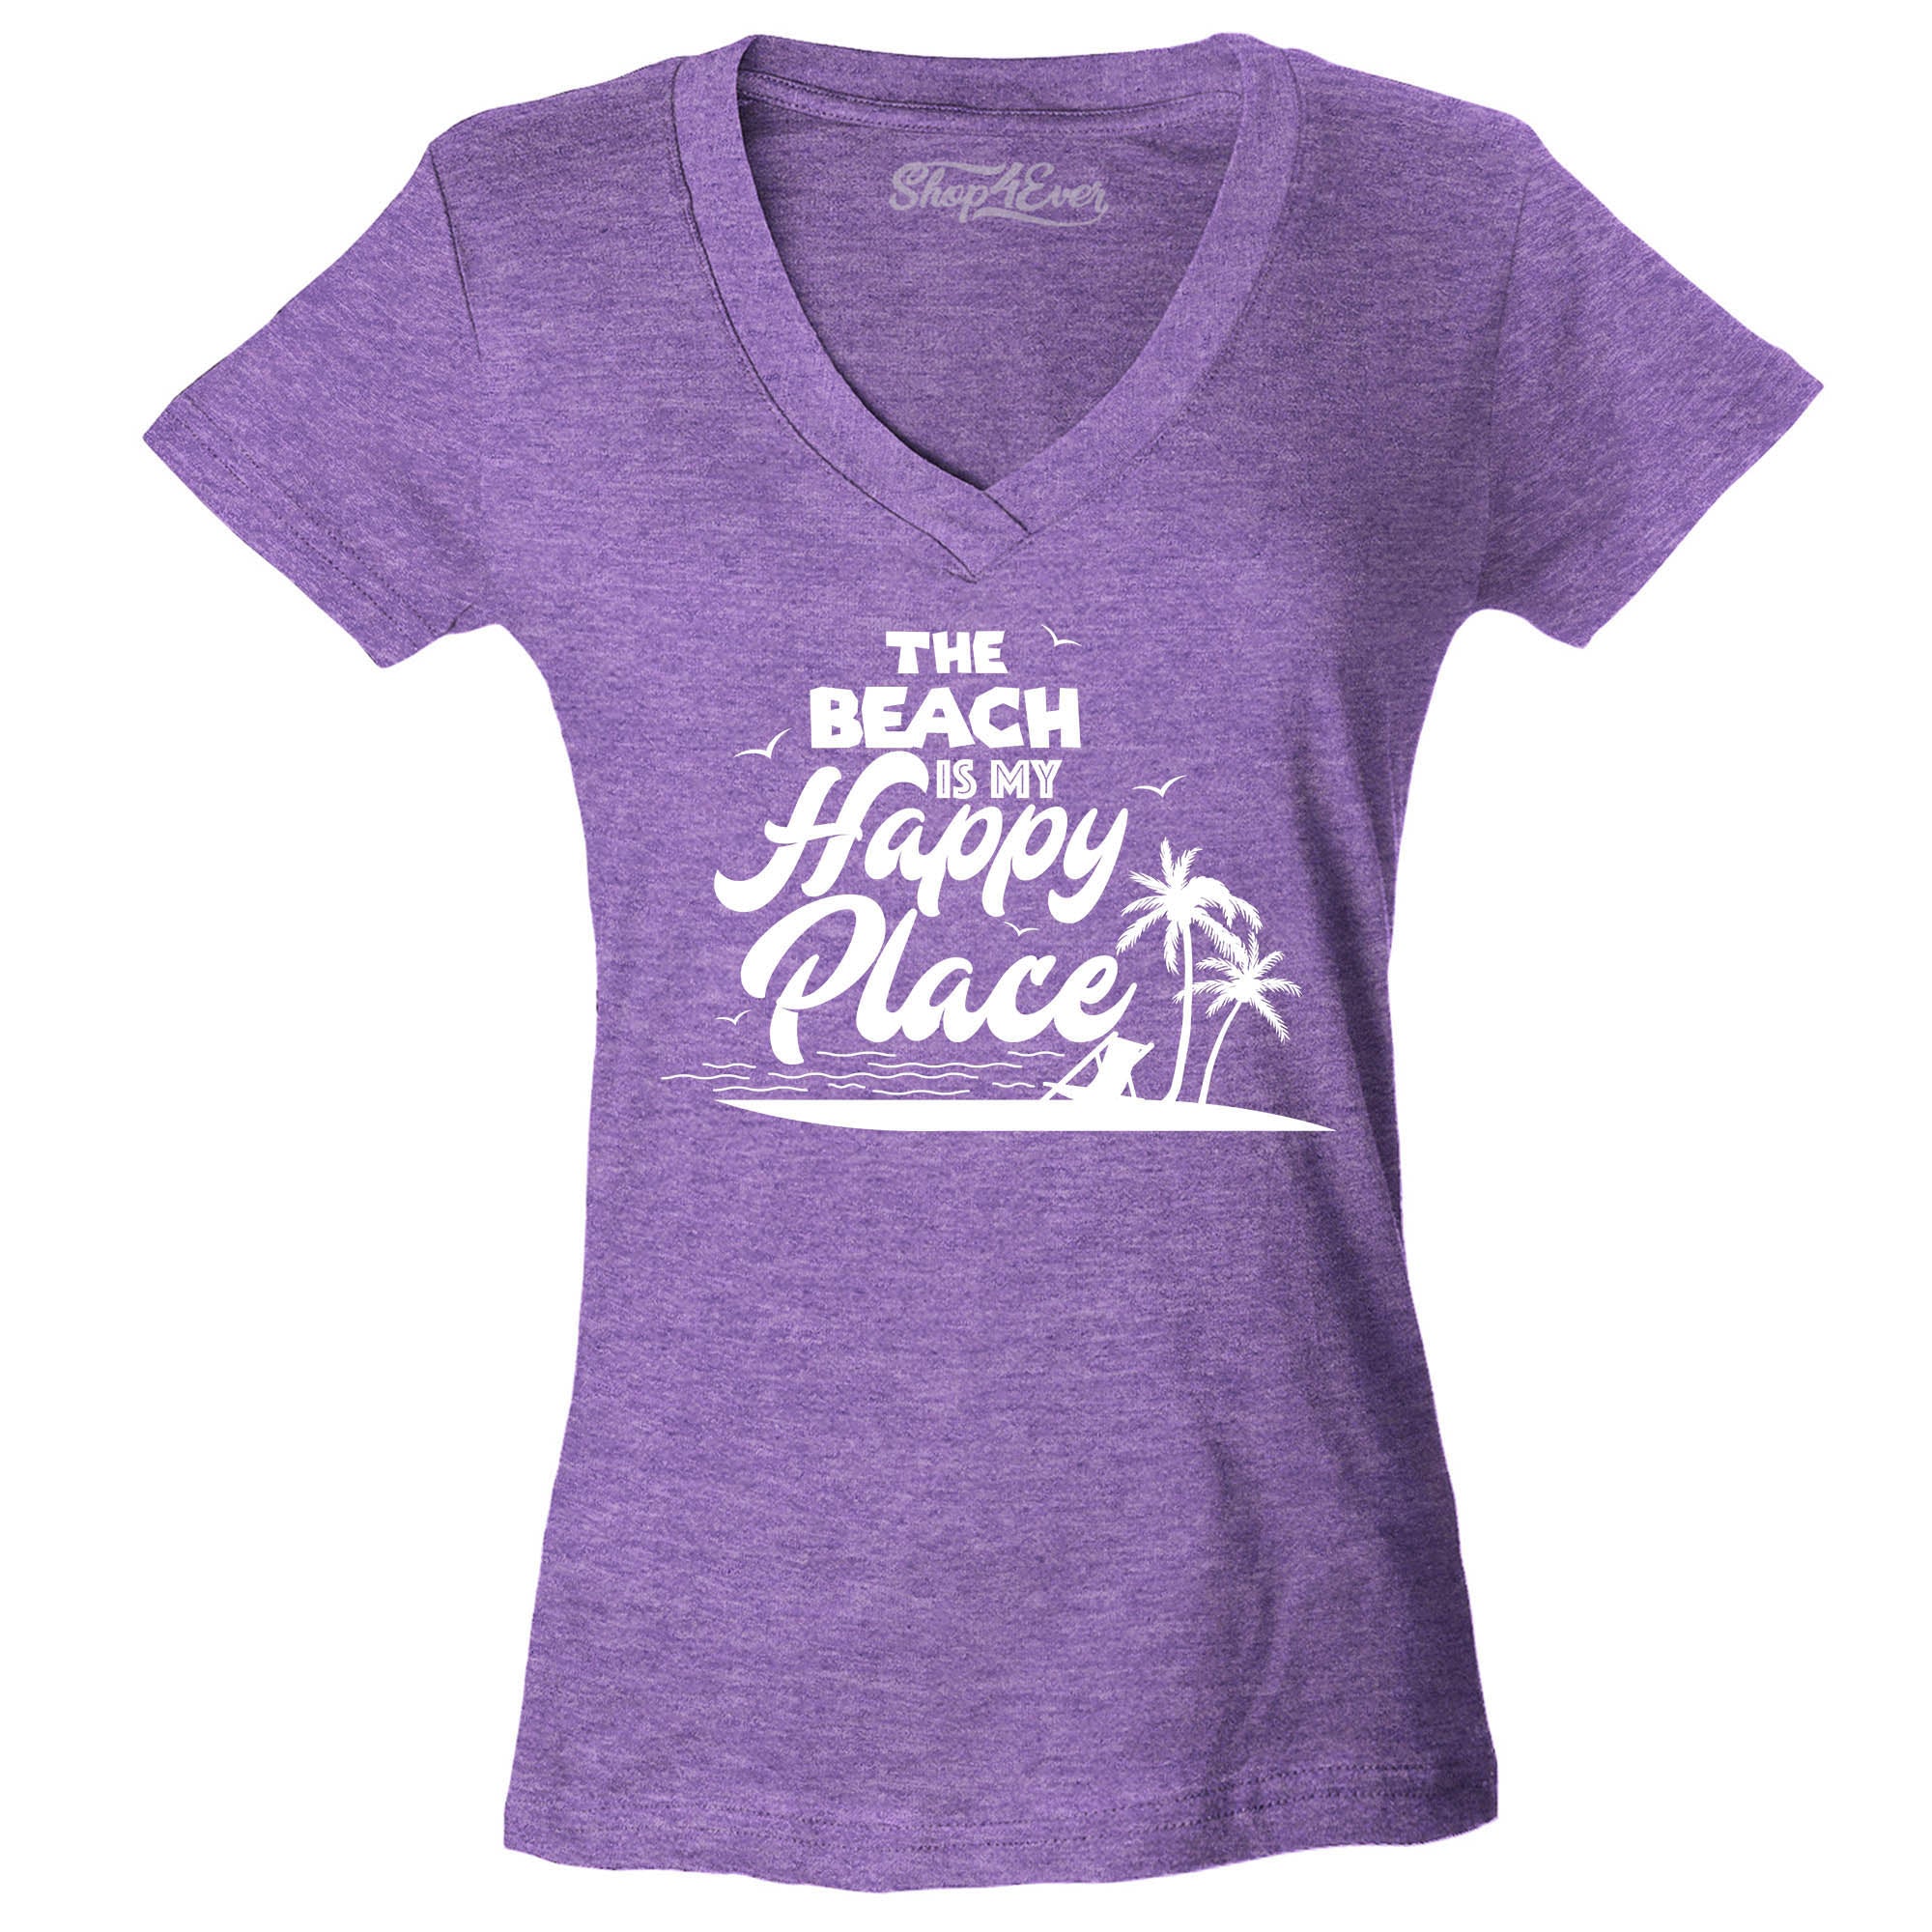 The Beach is My Happy Place Women's V-Neck T-Shirt Slim Fit